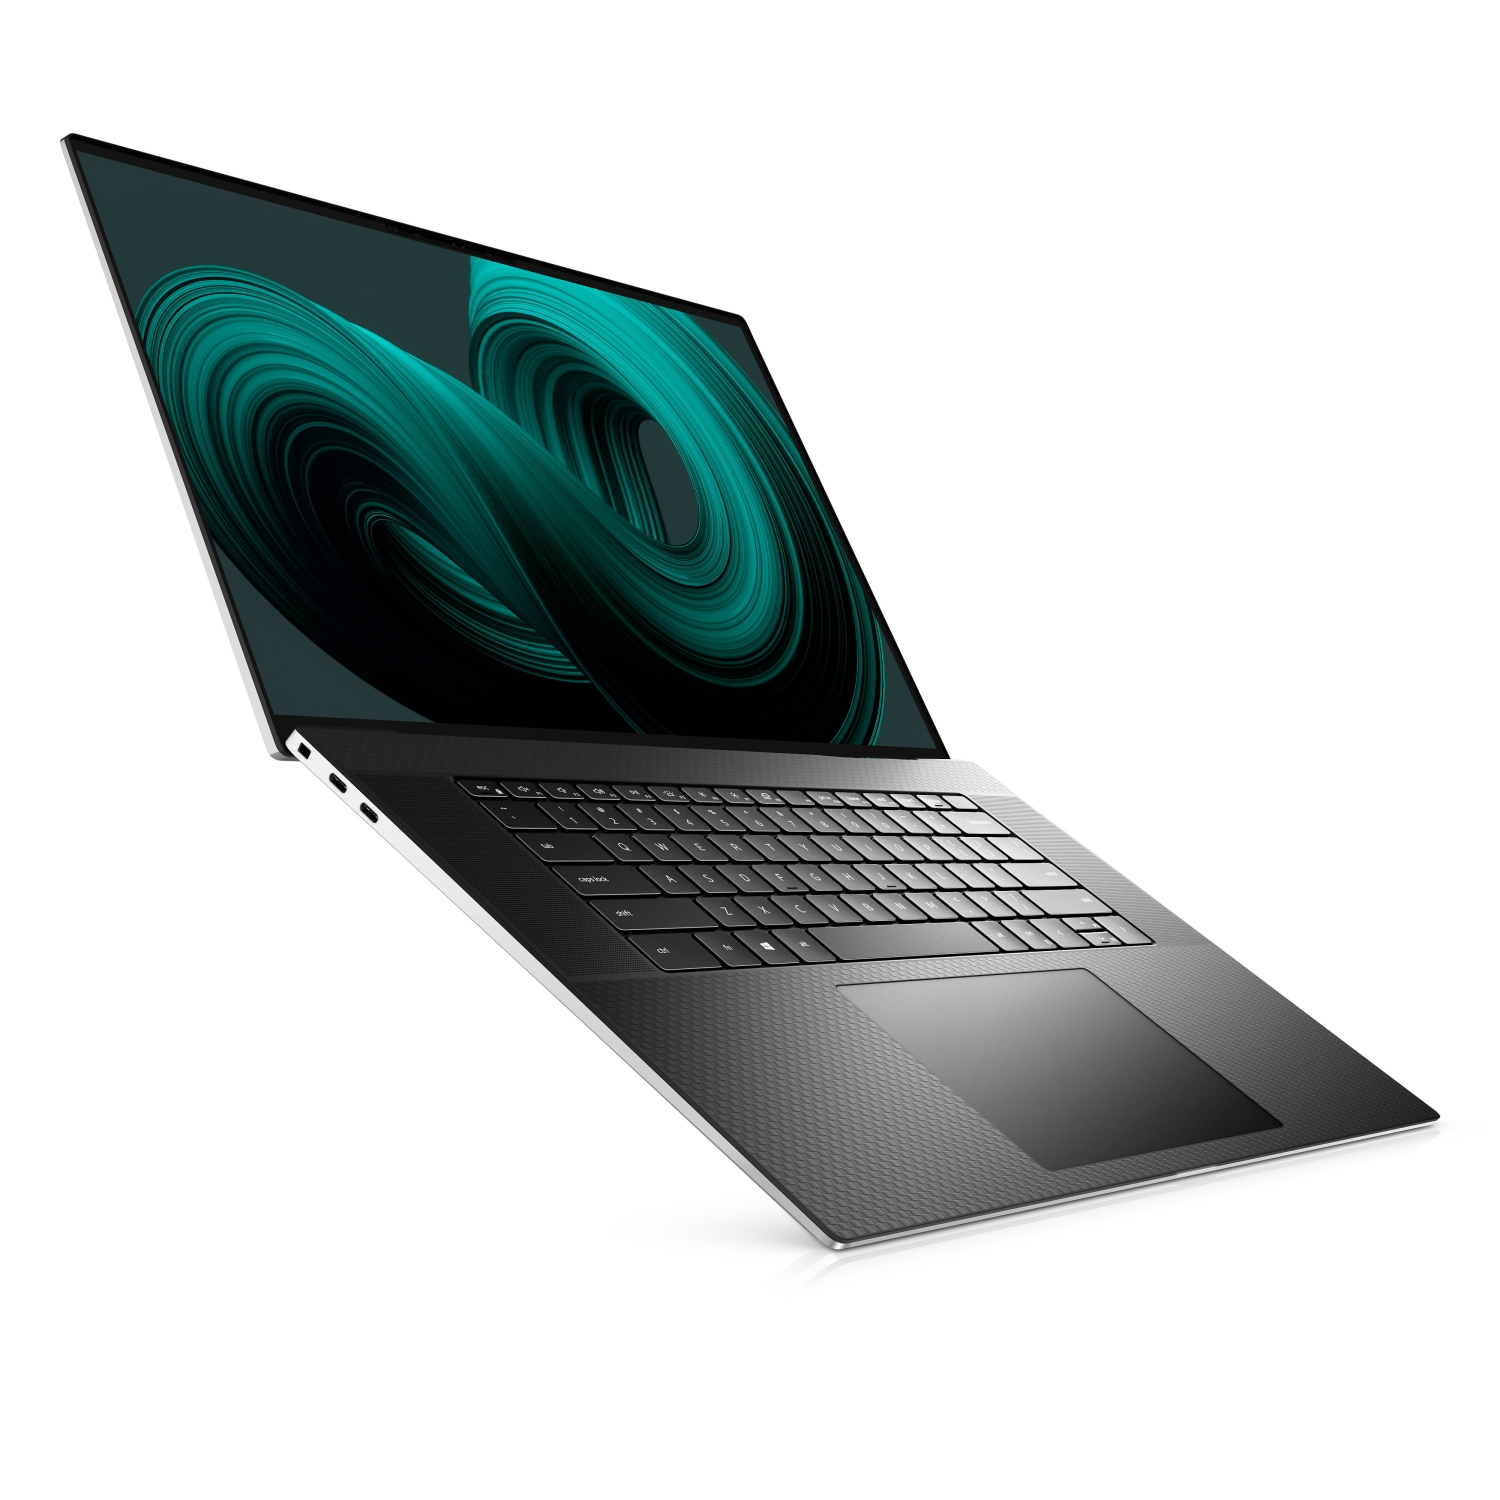 Refurbished (Excellent) - Dell XPS 17 9710 Laptop (2021) | 17" FHD+ | Core i9 - 1TB SSD - 32GB RAM - RTX 3060 | 8 Cores @ 4.9 GHz - 11th Gen CPU Certified Refurbished